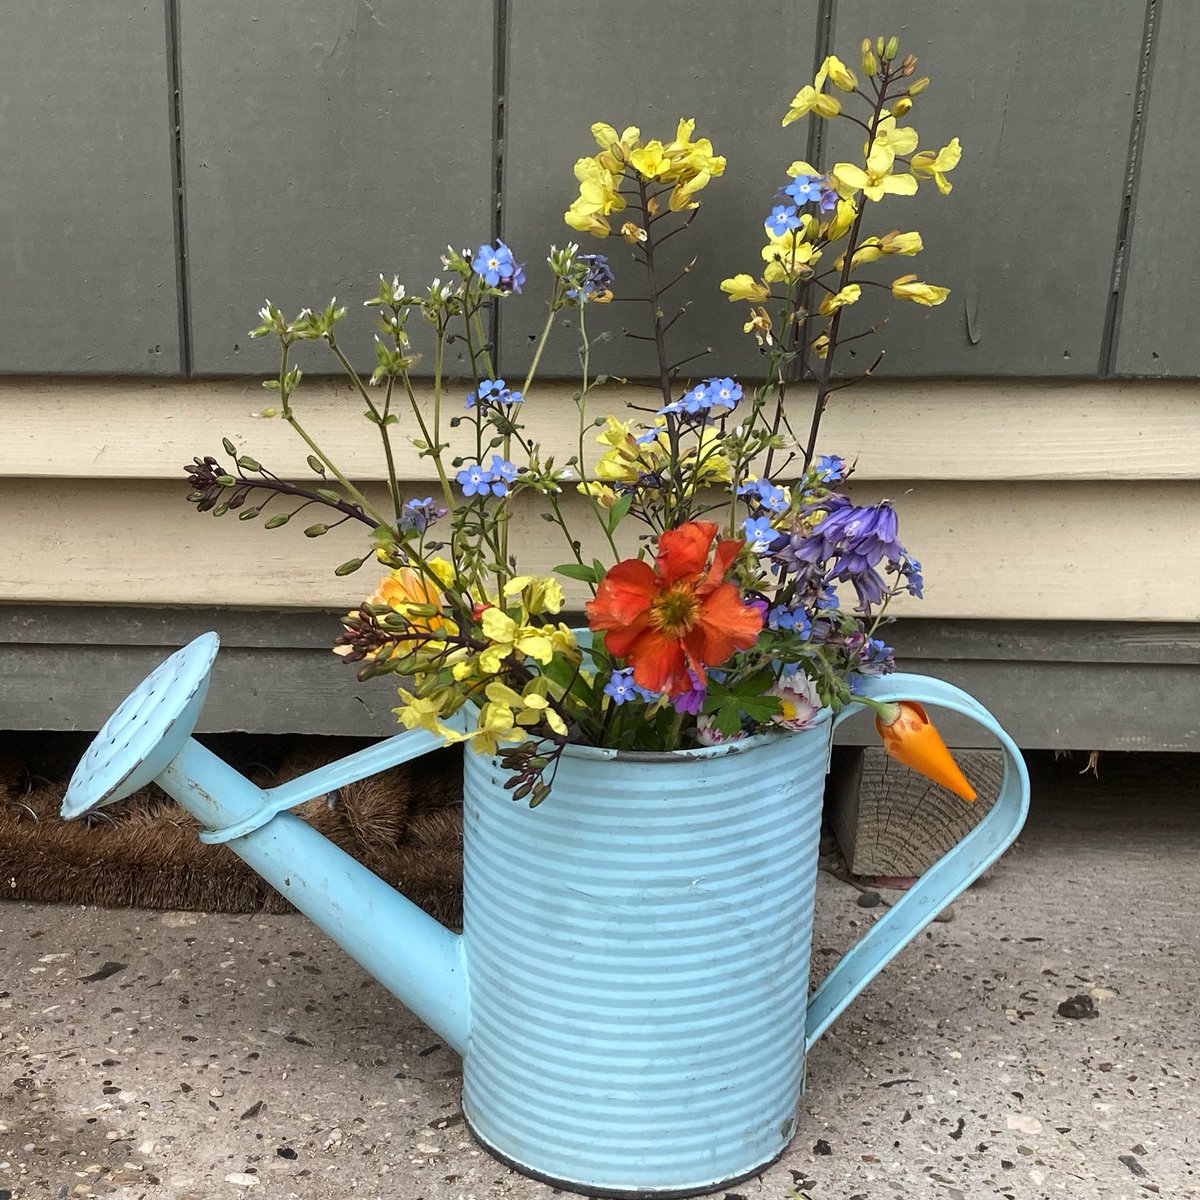 Haven’t needed to use this #watering can for awhile. Ideal for putting all the wind and weeding breakages 

#nannysgardenworld 

#geum #kale #daisy #bluebell #forgetmenot #californianpoppy #flowers